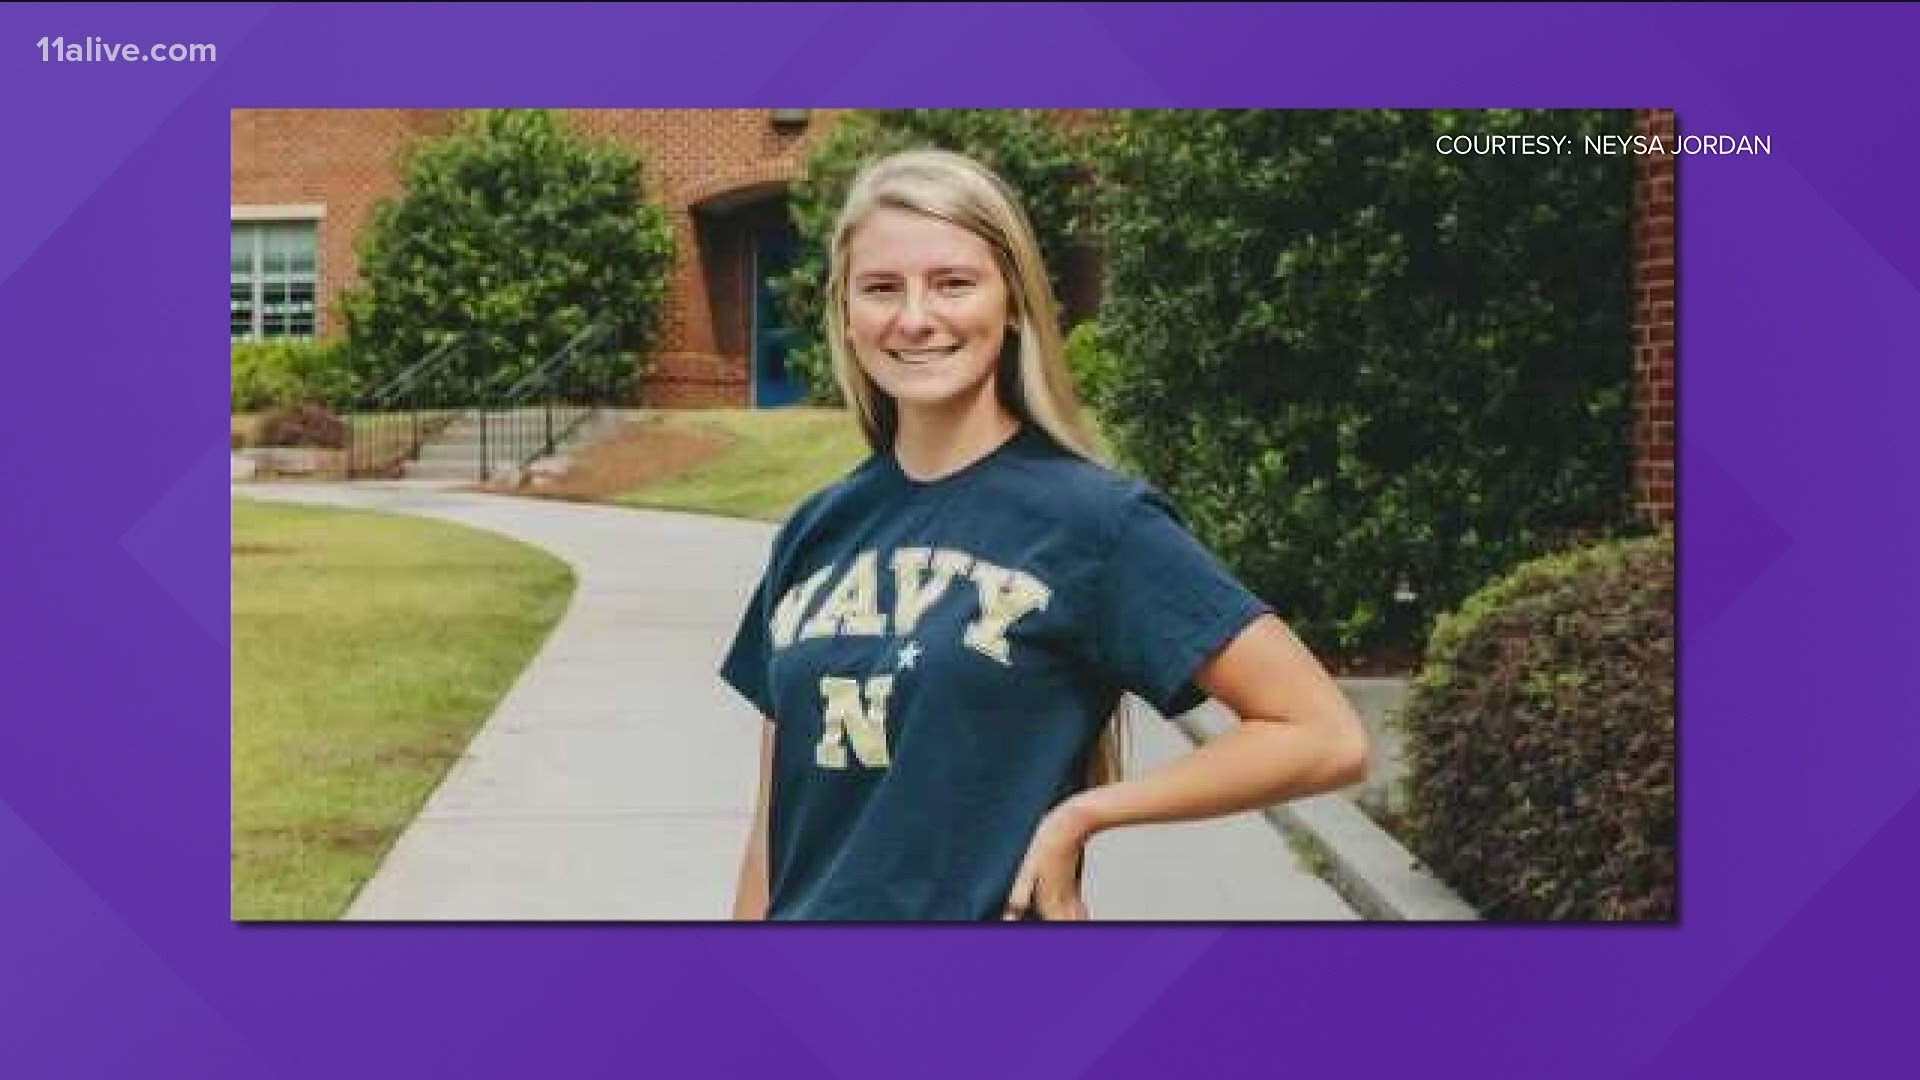 We’re sending congrats to Mallory Jordan! The Mount Paran Christian School senior was just accepted into three military schools.